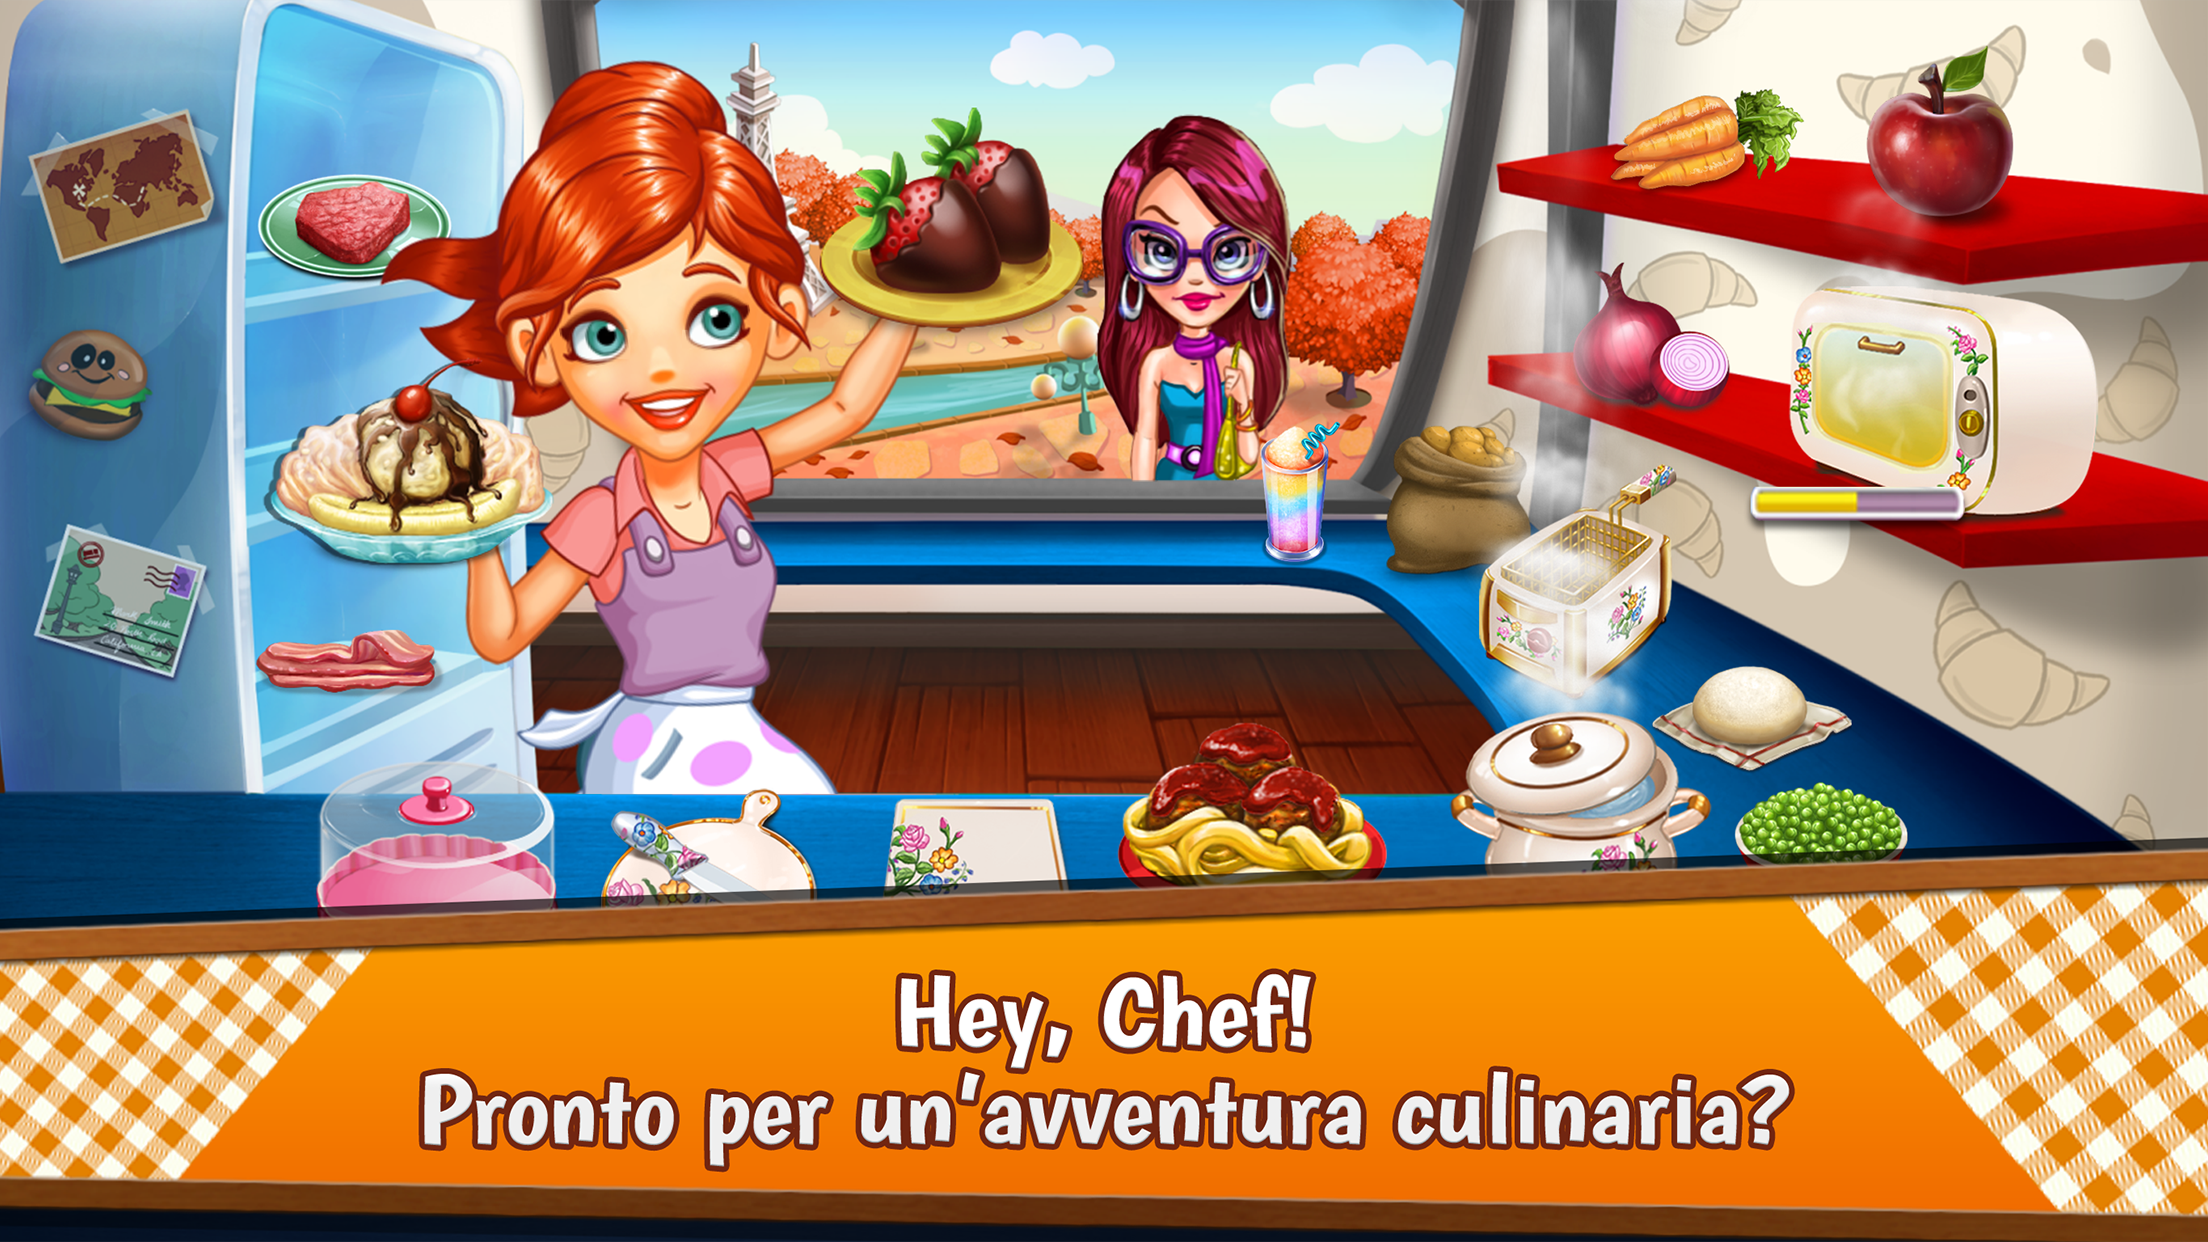 Android application Cooking Tale - Food Games screenshort